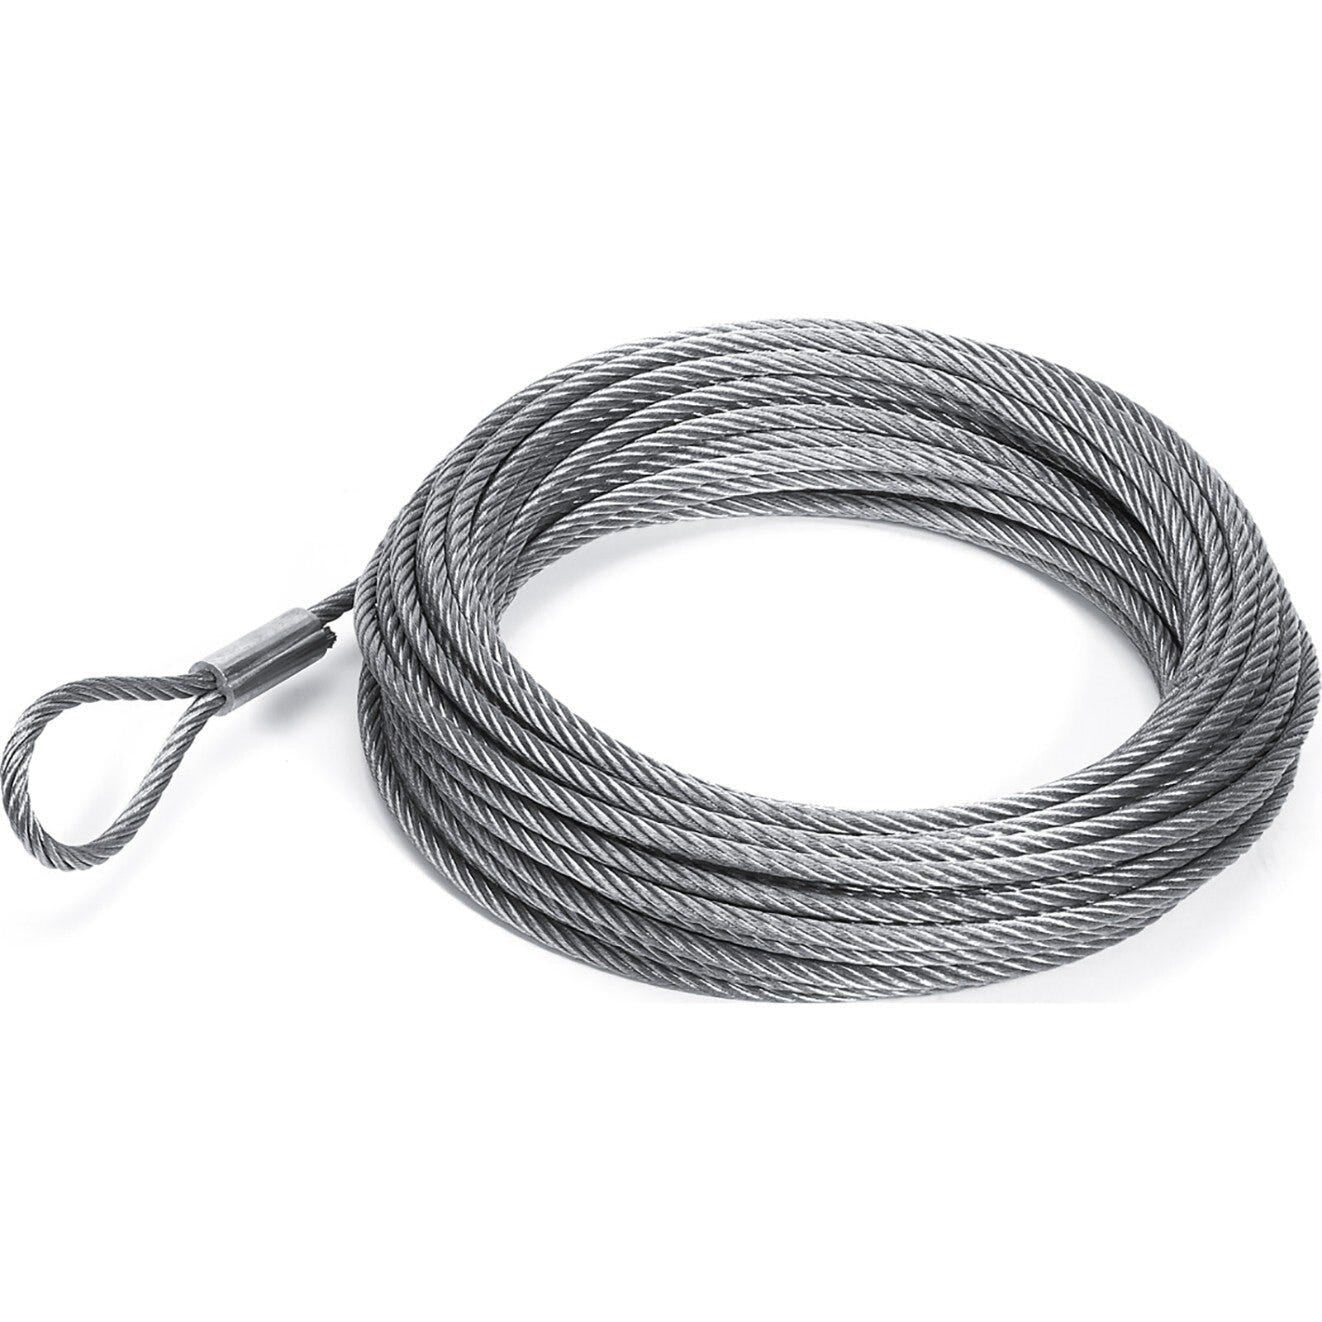 Can Am Wire Rope Replacement- 50' of 7/32 IN. P/N 715006256